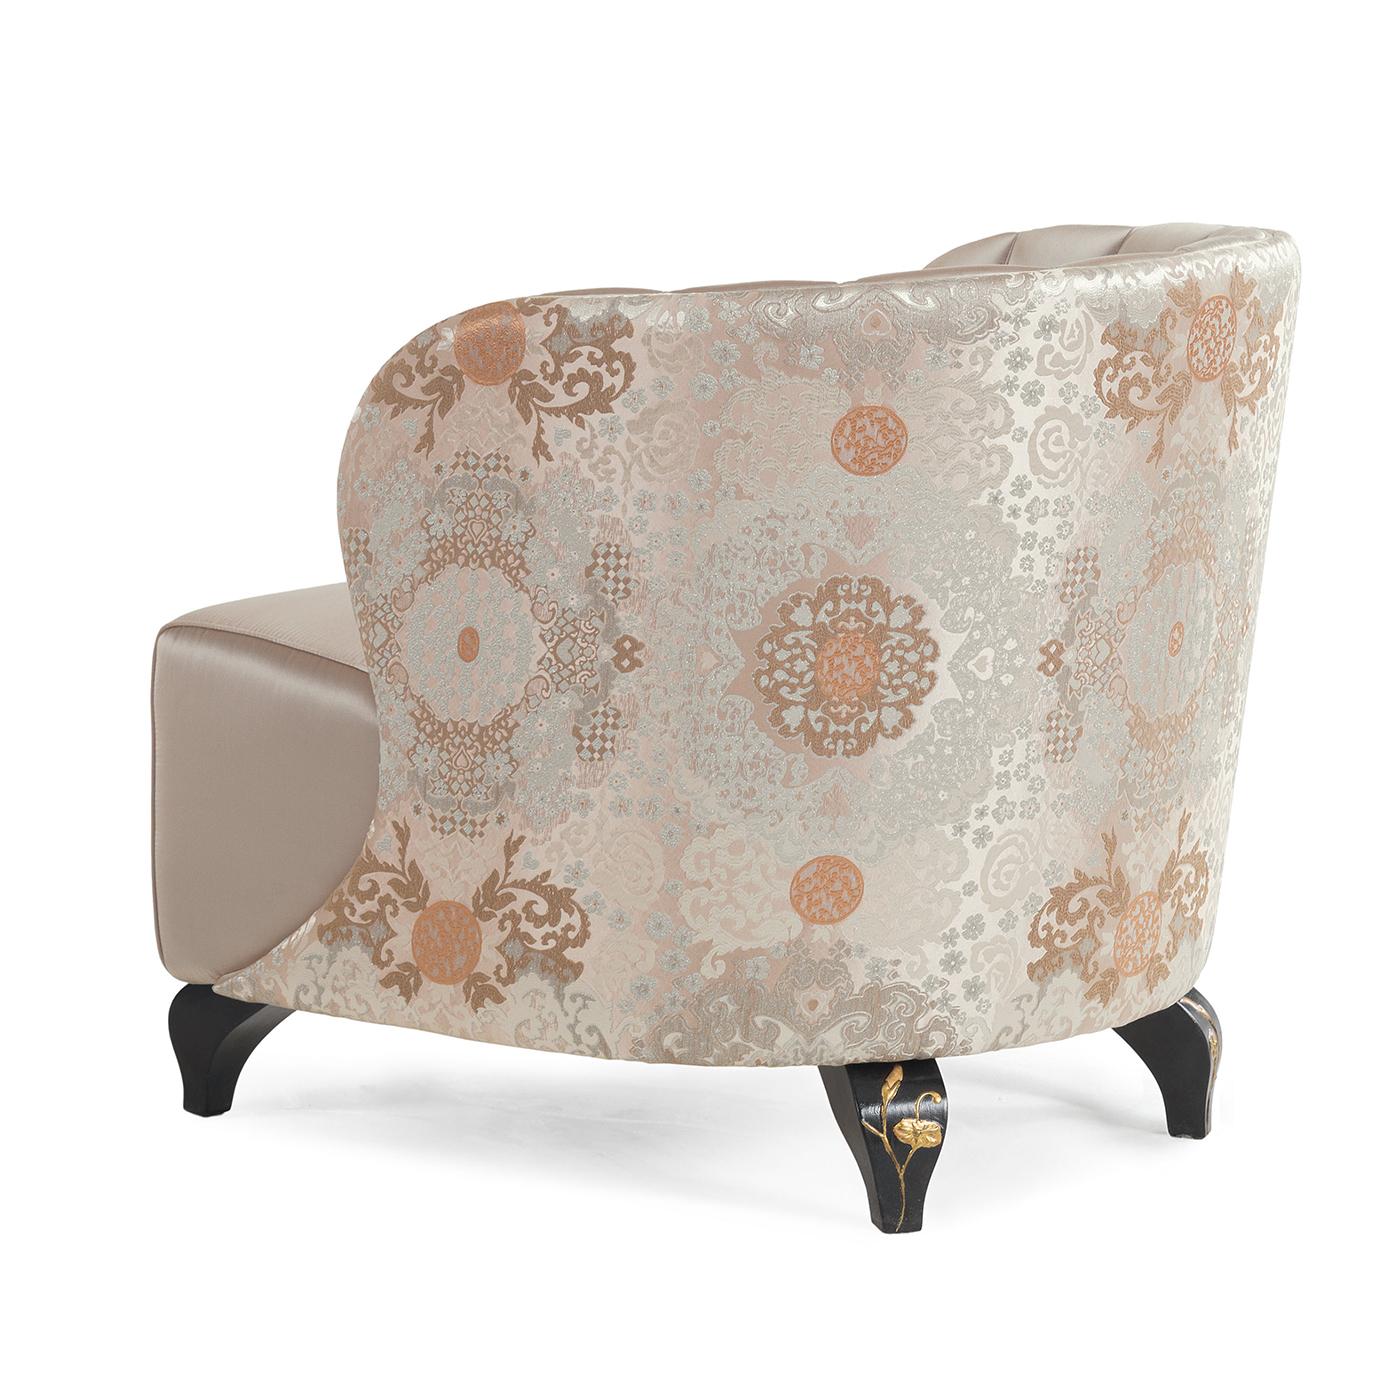 A magnificent piece of functional decor, this armchair will be a superb addition to an entryway, bedroom, or living room, where it can be also placed in the center of the room, to display the stunning decorations gracing its back and armrests. The